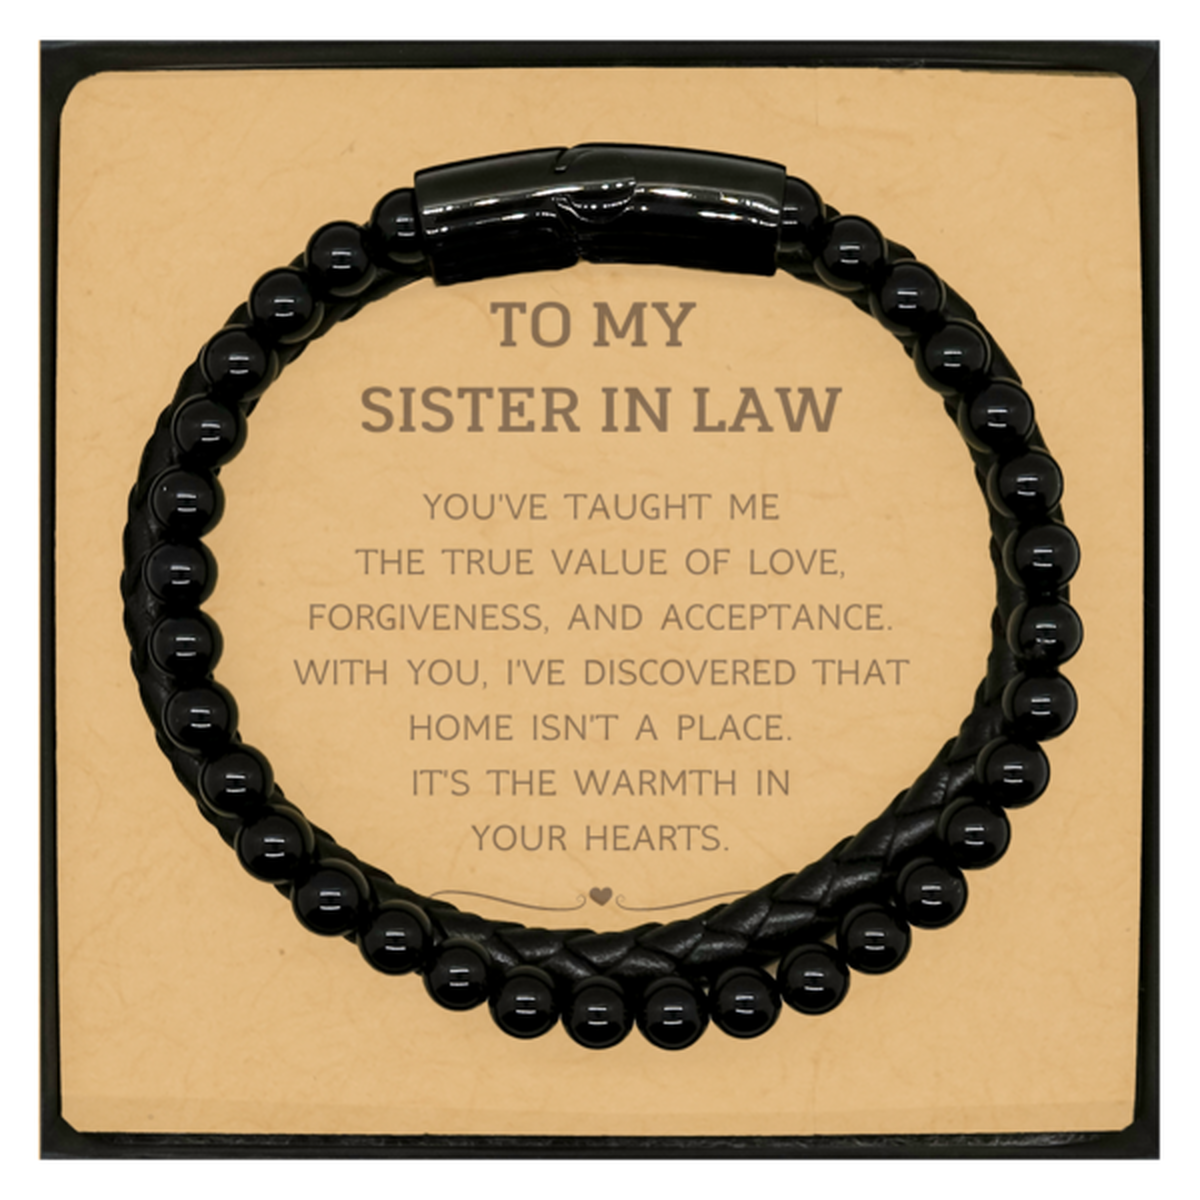 To My Sister In Law Gifts, You've taught me the true value of love, Thank You Gifts For Sister In Law, Birthday Christmas Stone Leather Bracelets For Sister In Law